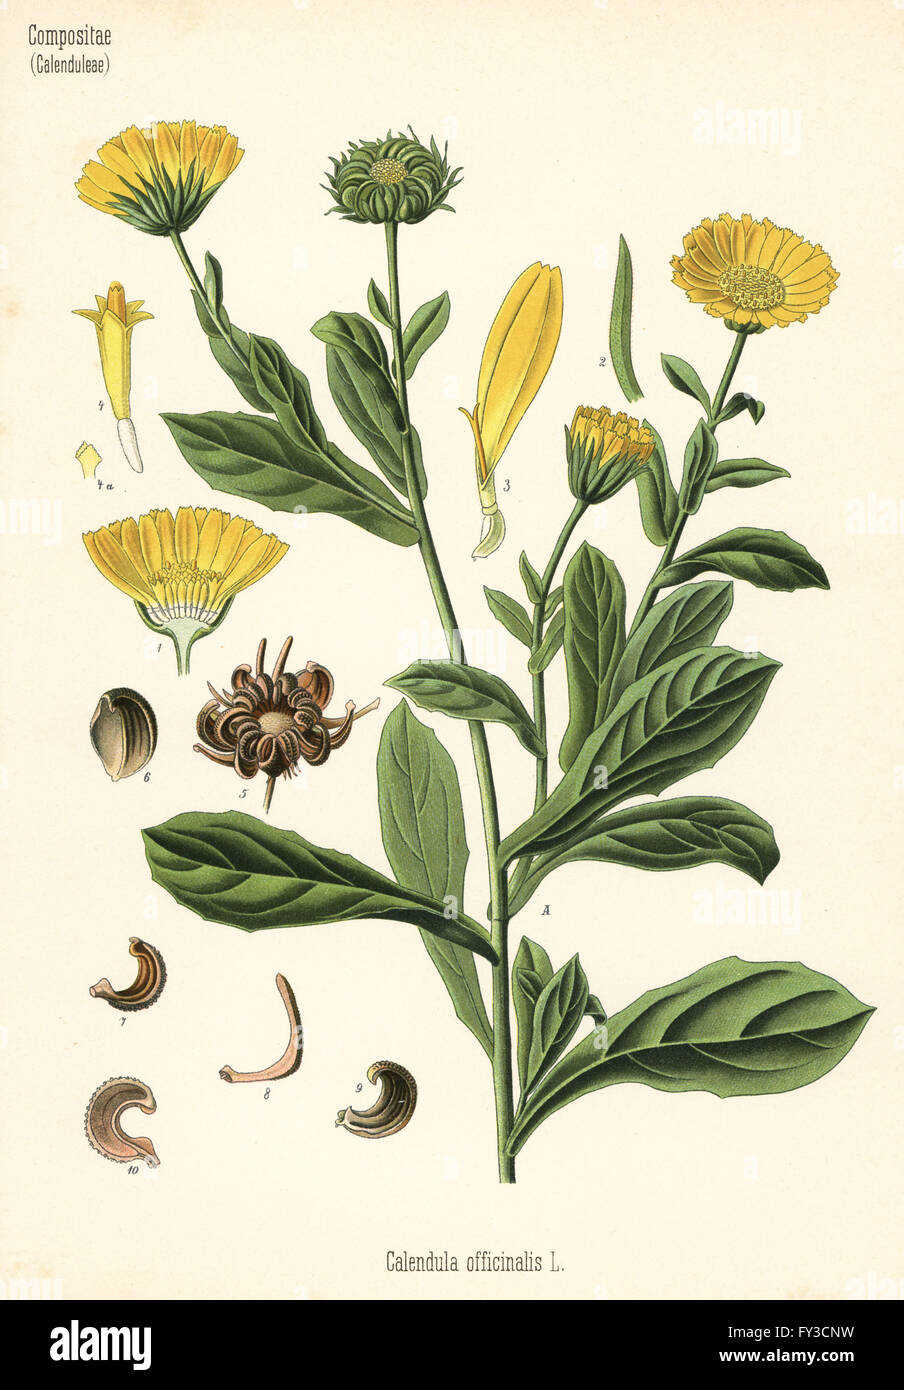 Pot marigold, Calendula officinalis. Chromolithograph after a botanical illustration from Hermann Adolph Koehler's Medicinal Plants, edited by Gustav Pabst, Koehler, Germany, 1887. Stock Photo